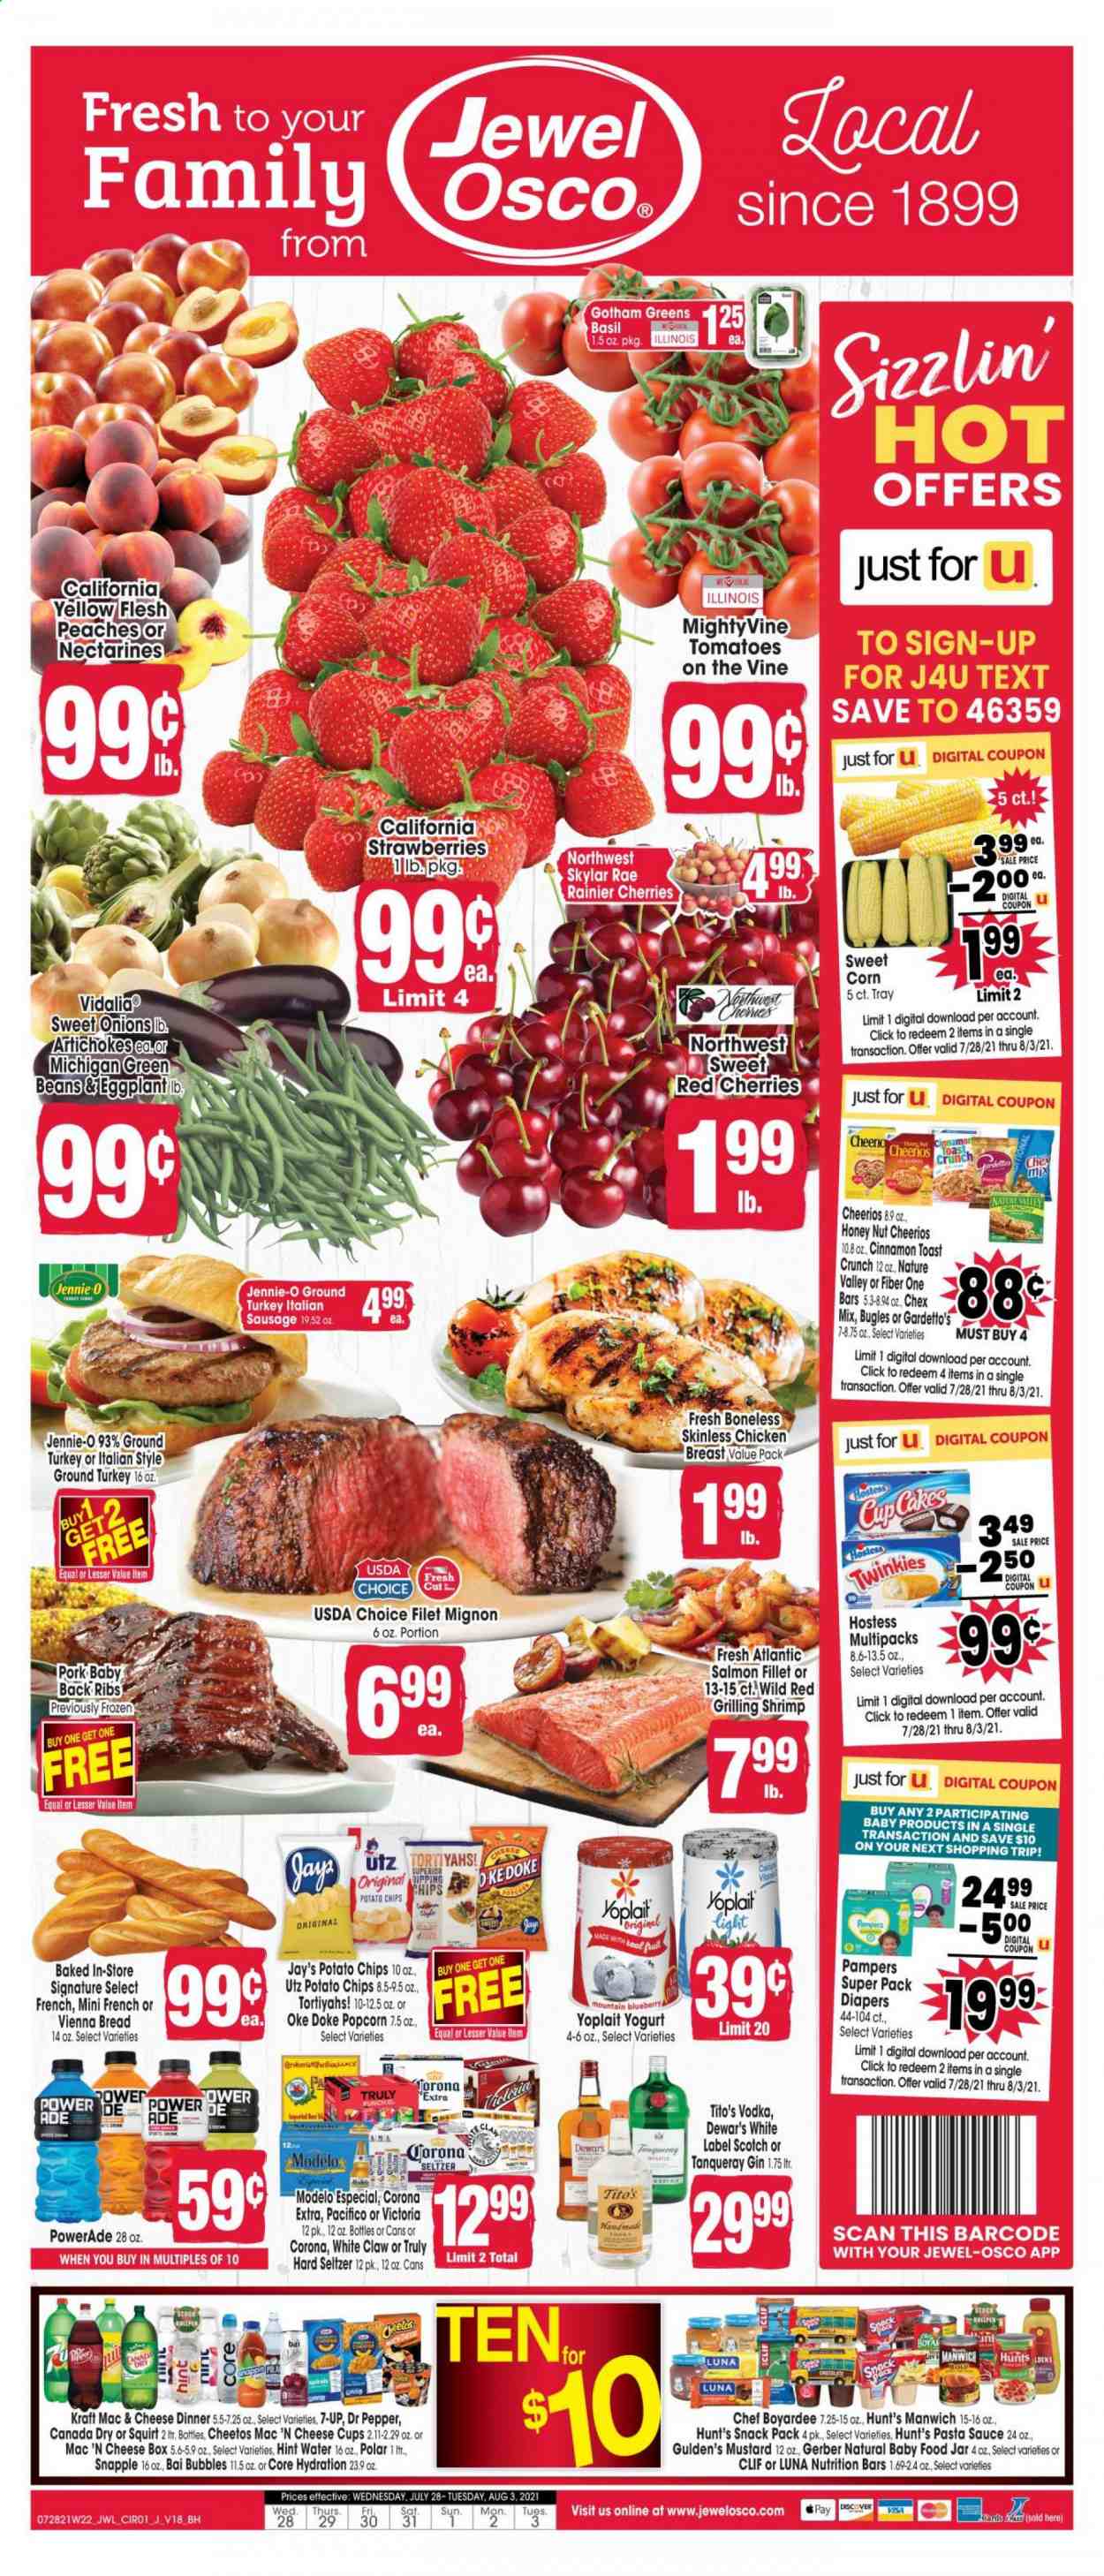 thumbnail - Jewel Osco Flyer - 07/28/2021 - 08/03/2021 - Sales products - bread, cake, artichoke, beans, corn, green beans, tomatoes, onion, eggplant, sweet corn, nectarines, cherries, peaches, fish fillets, salmon, salmon fillet, shrimps, macaroni & cheese, pasta sauce, sauce, Kraft®, ready meal, chicken breasts, italian sausage, cheese cup, yoghurt, Yoplait, snack bar, cereal bar, snack cake, bars, Gerber, tortilla chips, potato chips, Cheetos, chips, popcorn, Chex Mix, Manwich, Chef Boyardee, cereals, Cheerios, nutrition bar, Nature Valley, Fiber One, mustard, Canada Dry, ginger ale, Powerade, energy drink, fruit drink, Dr. Pepper, soft drink, 7UP, Snapple, Bai, antioxidant drink, water, carbonated soft drink, gin, vodka, White Claw, Hard Seltzer, TRULY, beer, Corona Extra, Modelo, baby food pouch, baby food jar, baby snack, ground turkey, chicken, turkey, beef tenderloin, ribs, pork meat, pork ribs, pork back ribs, Pampers, nappies, label, nutritional supplement. Page 1.